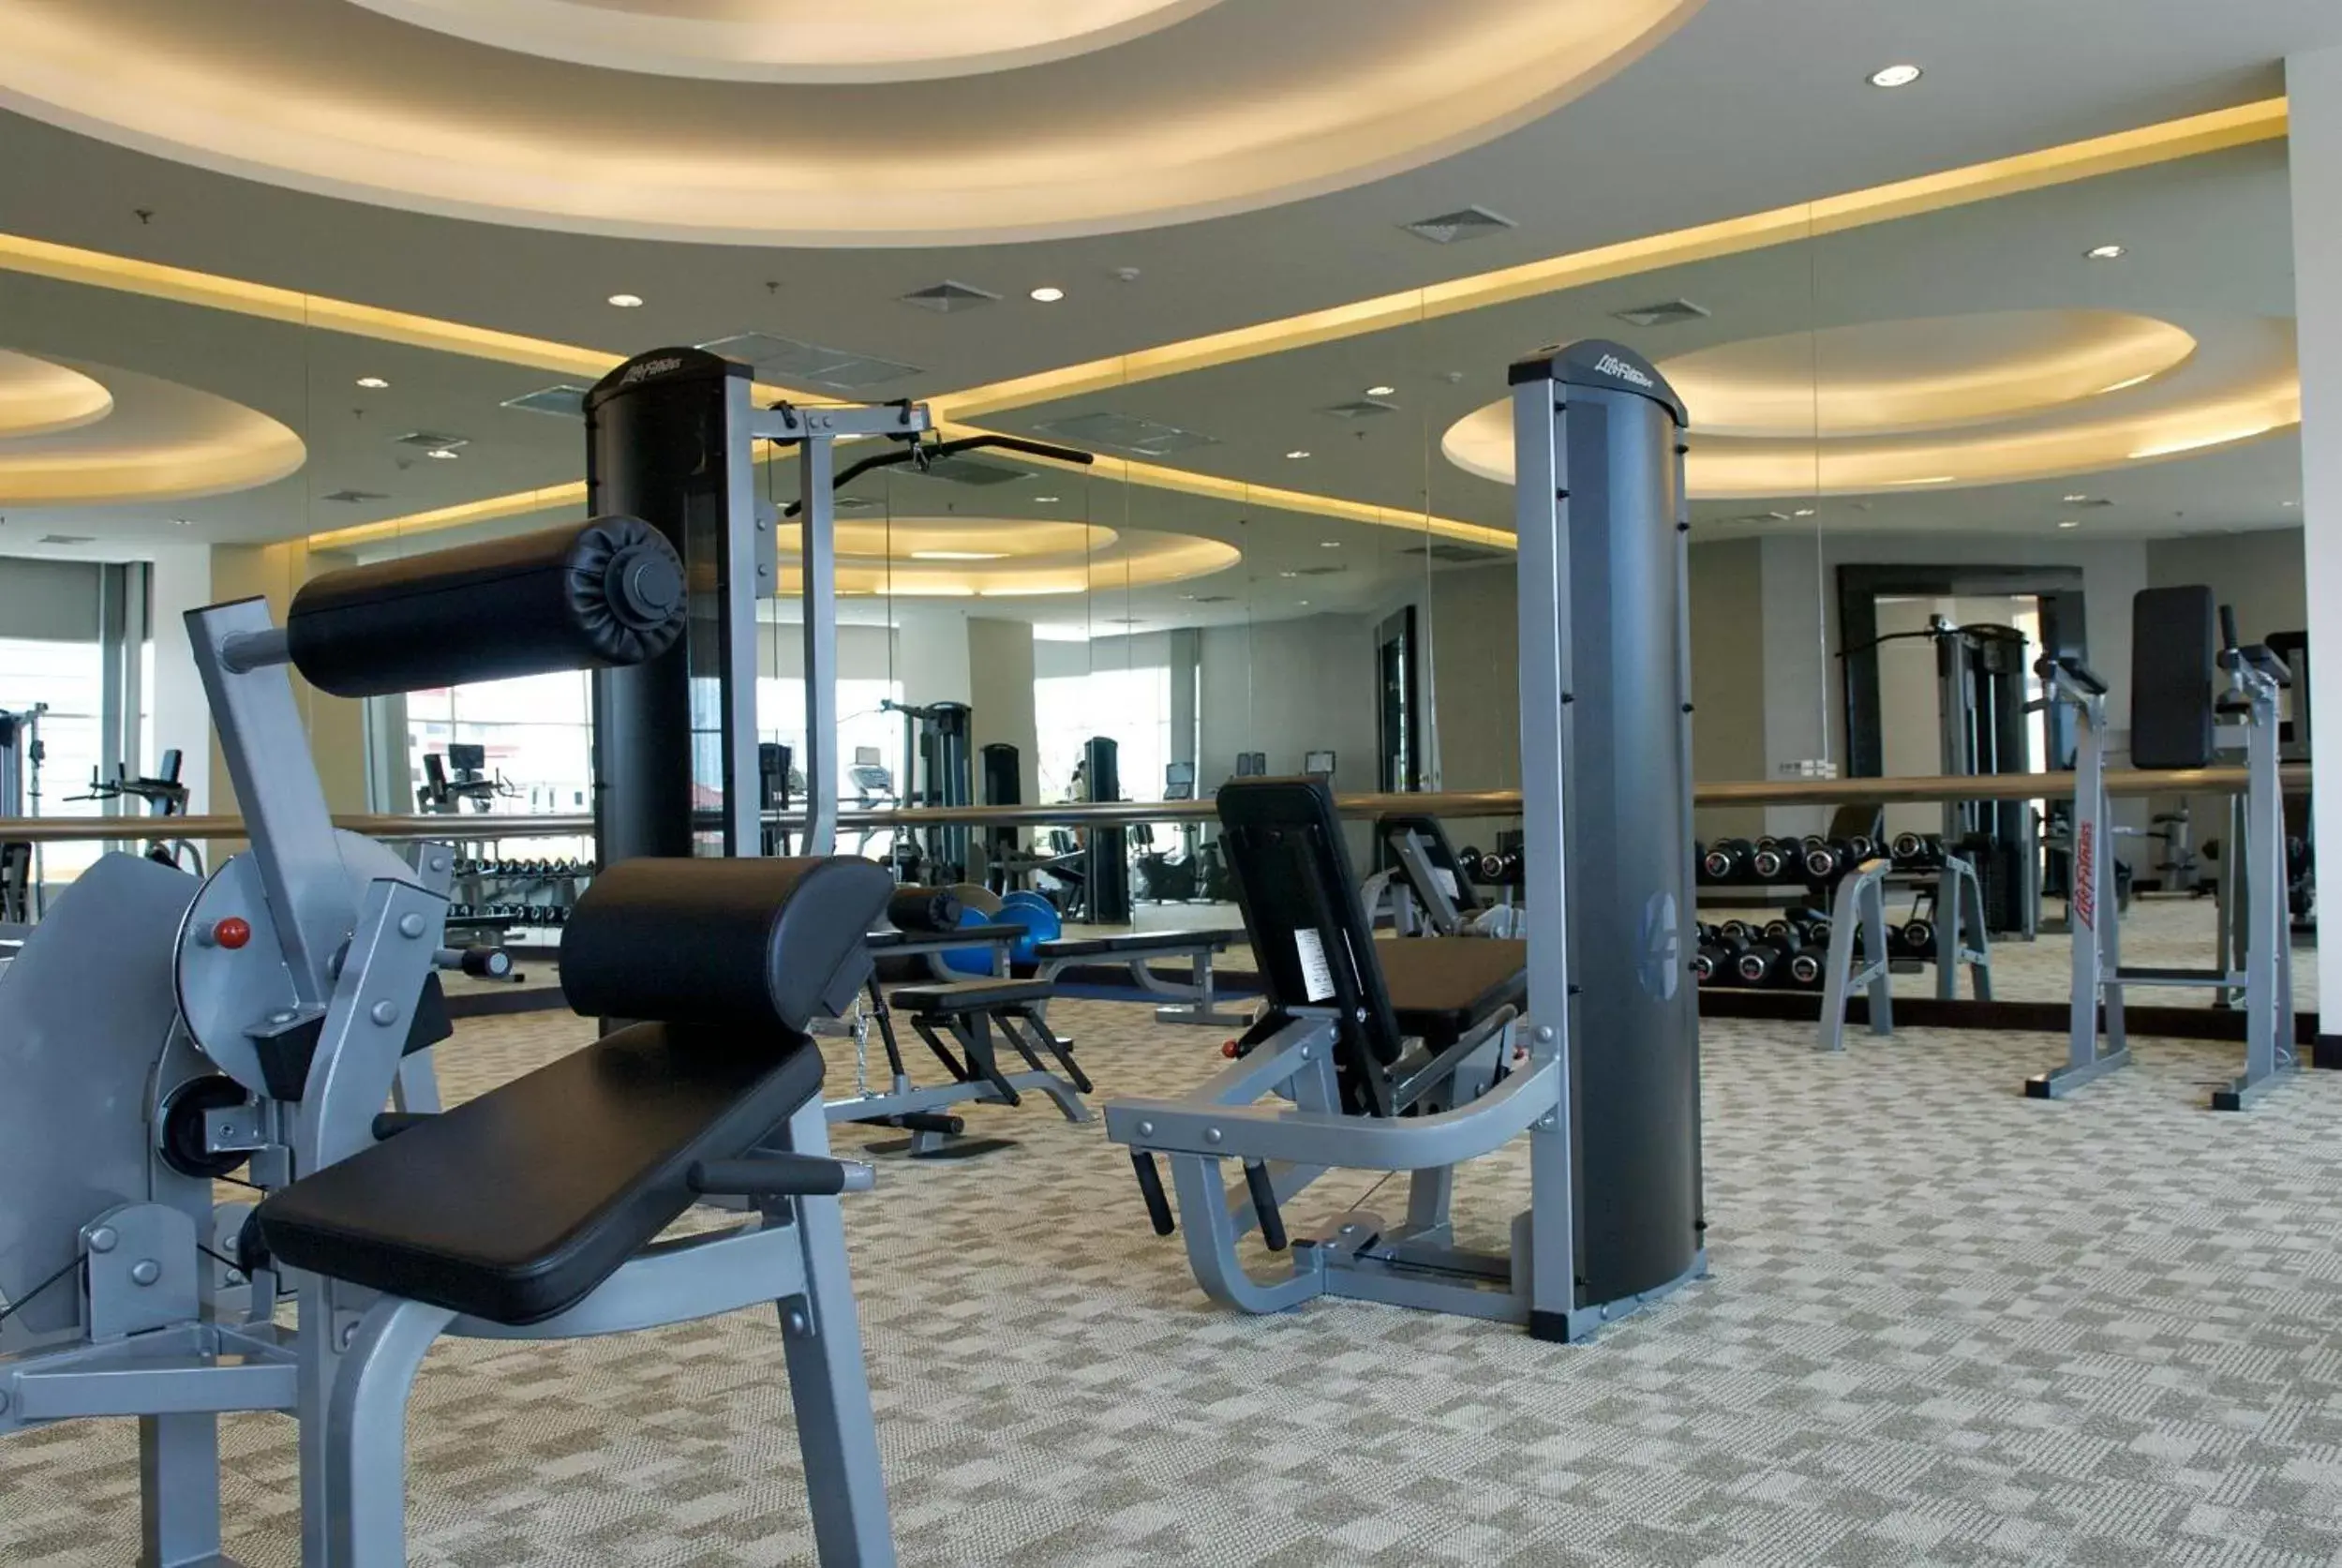 Fitness centre/facilities, Fitness Center/Facilities in The Narathiwas Hotel & Residence Sathorn Bangkok